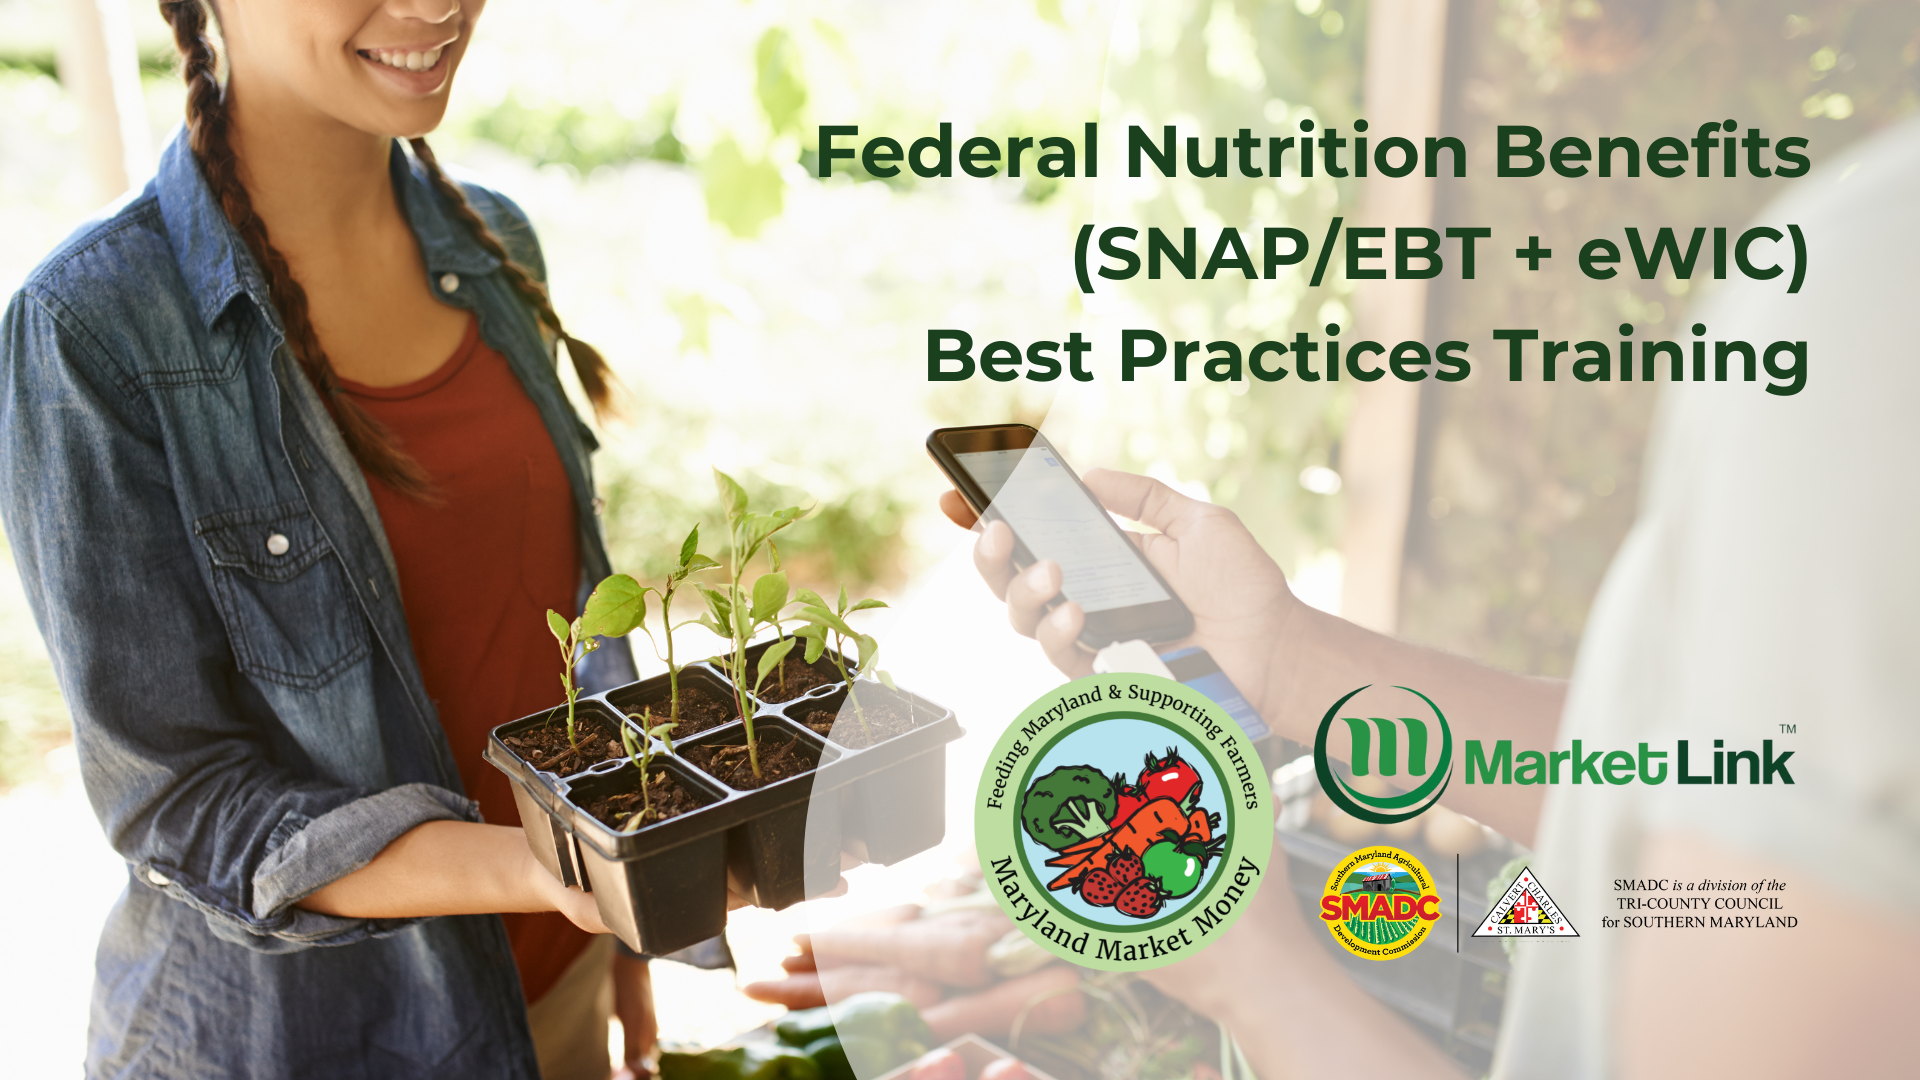 Federal Nutrition Benefits Best Practices Training